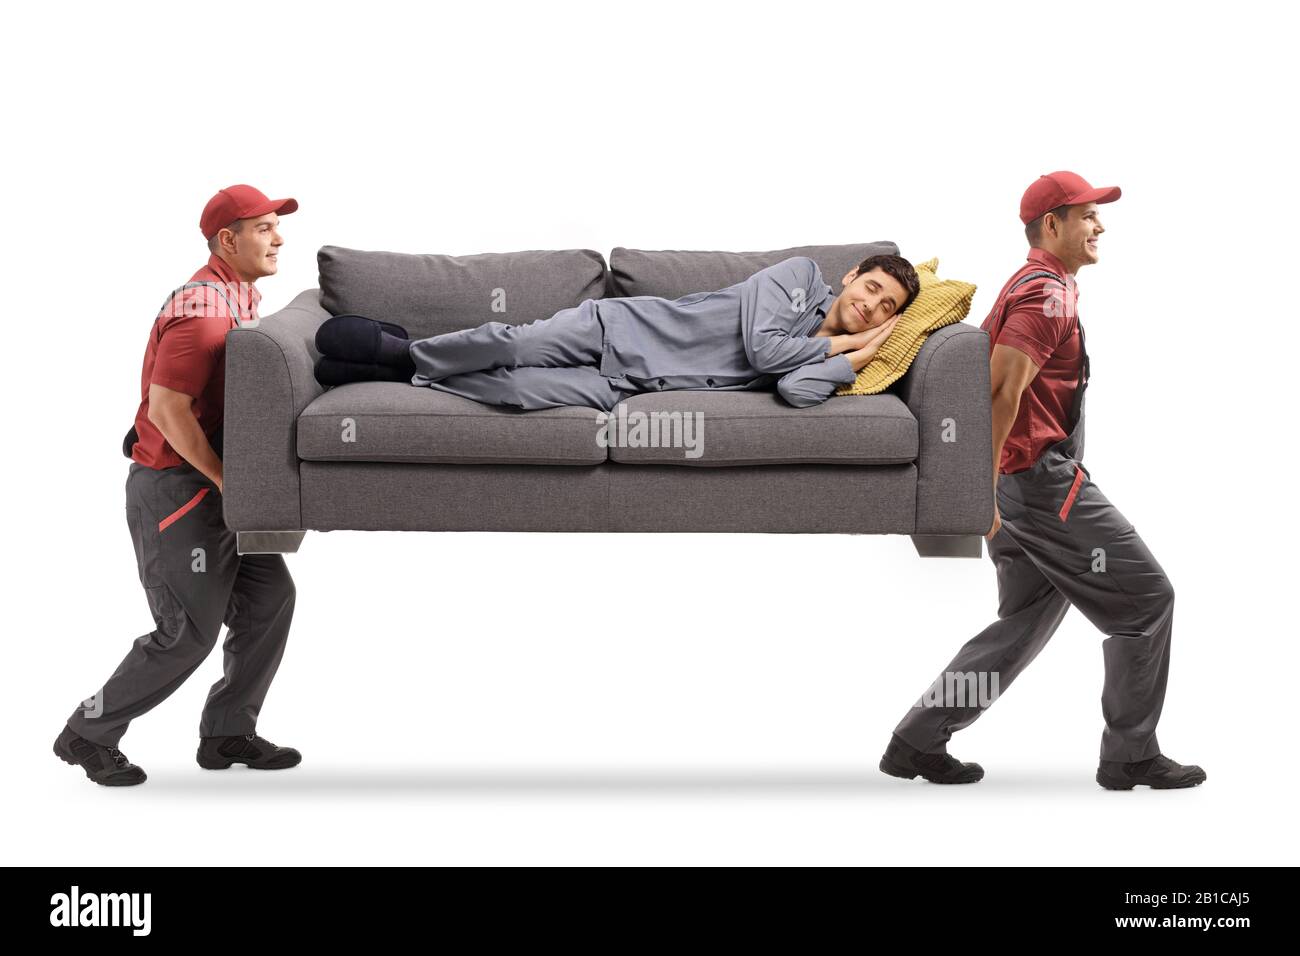 Full length shot of two movers carrying a couch and a man in pajamas sleeping on it isolated on white background Stock Photo